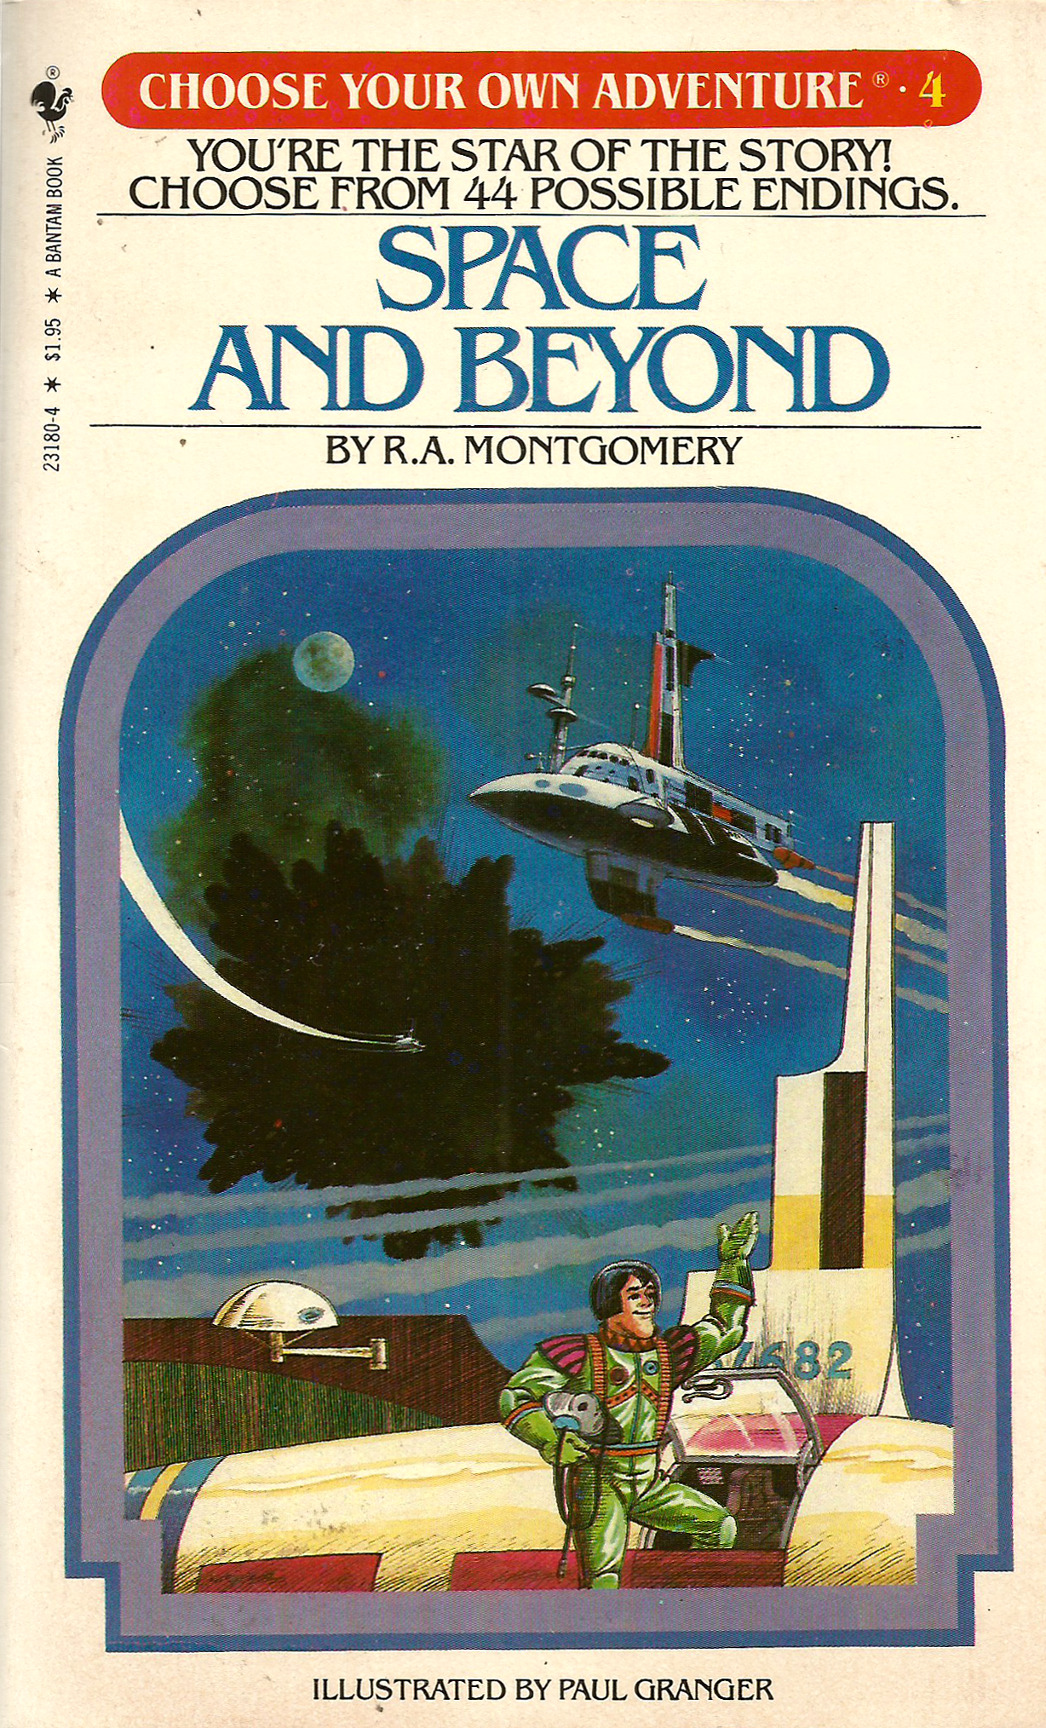 Choose Your Own Adventure No. 4: Space And Beyond, by R. A. Montgomery. Illustrated